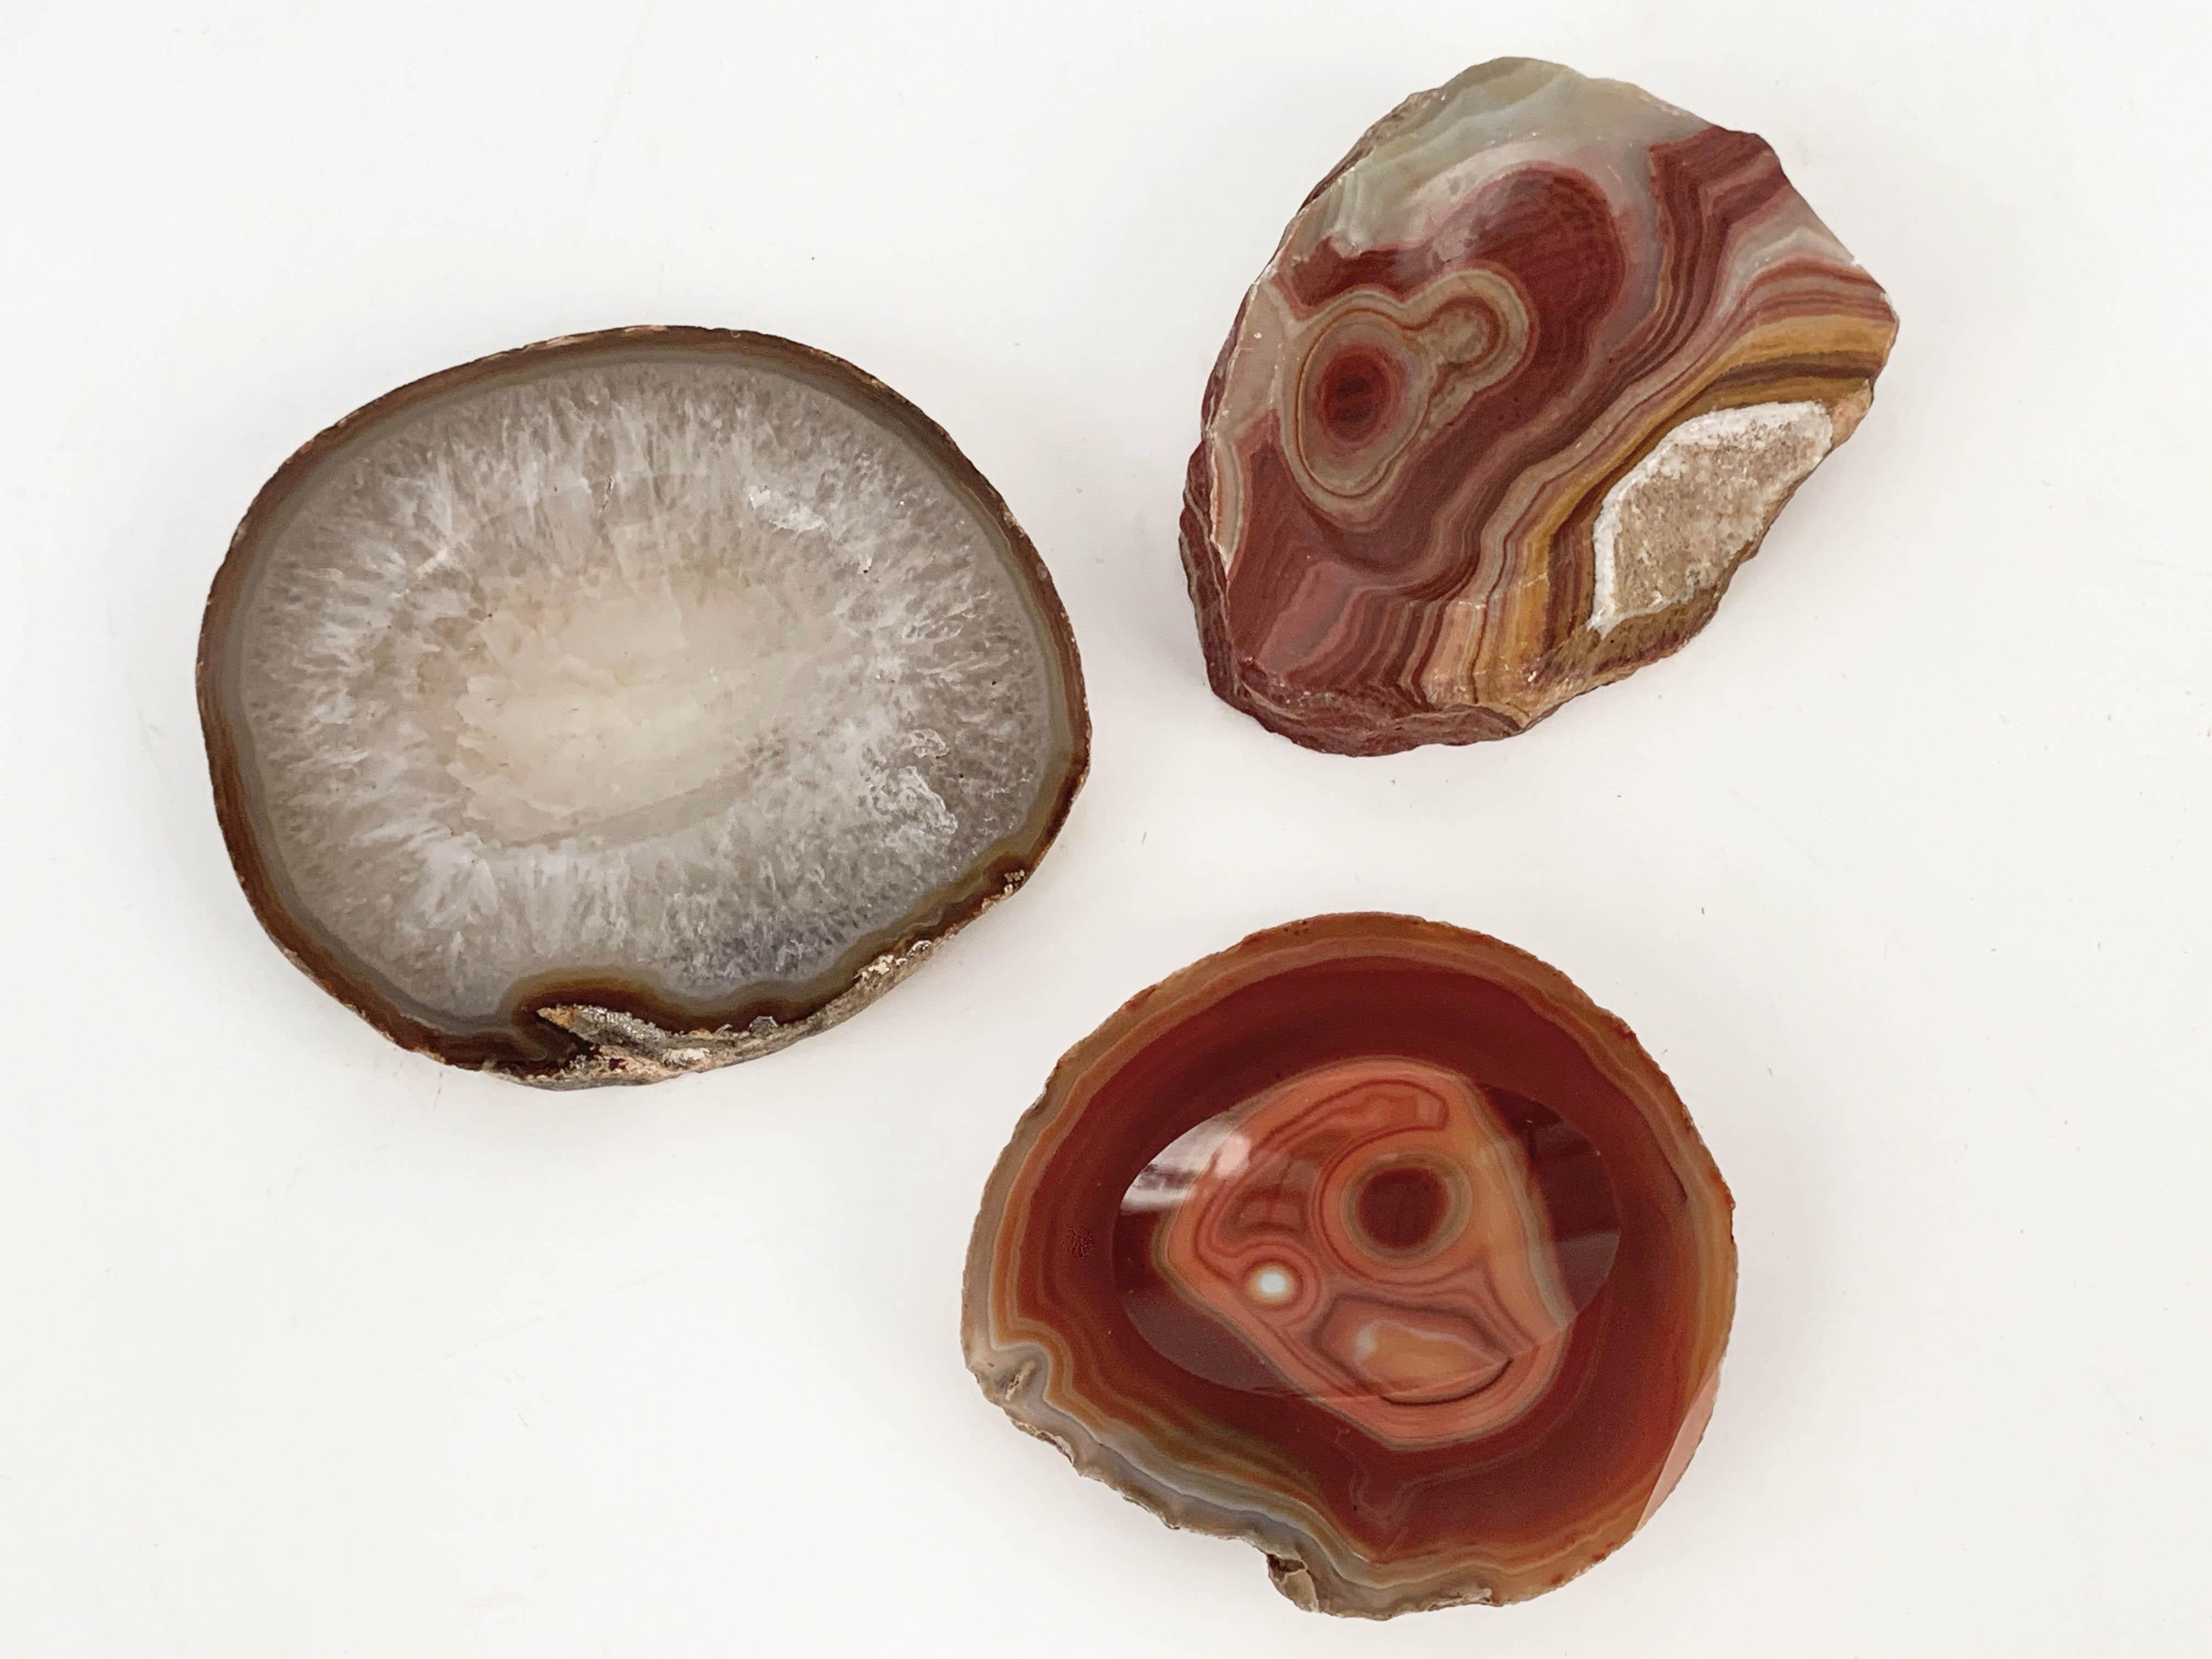 Midcentury White, Organge and Red Onyx, Agate and Quartz Decorative Geode Bowls For Sale 5